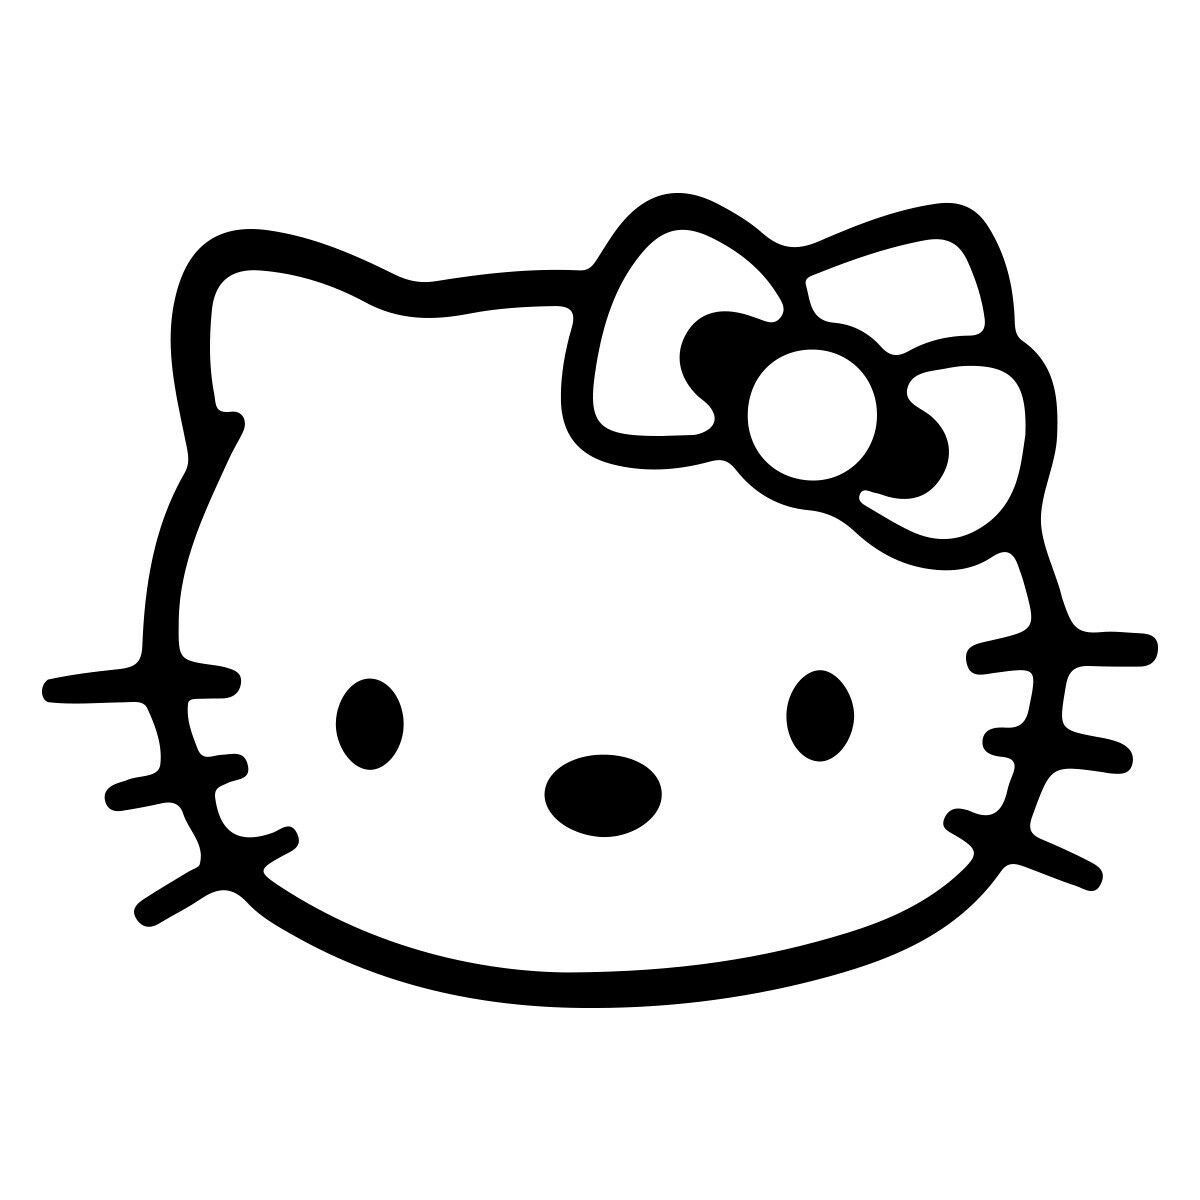 Hello Kitty Car Mirror Stickers - Customize Your Ride!